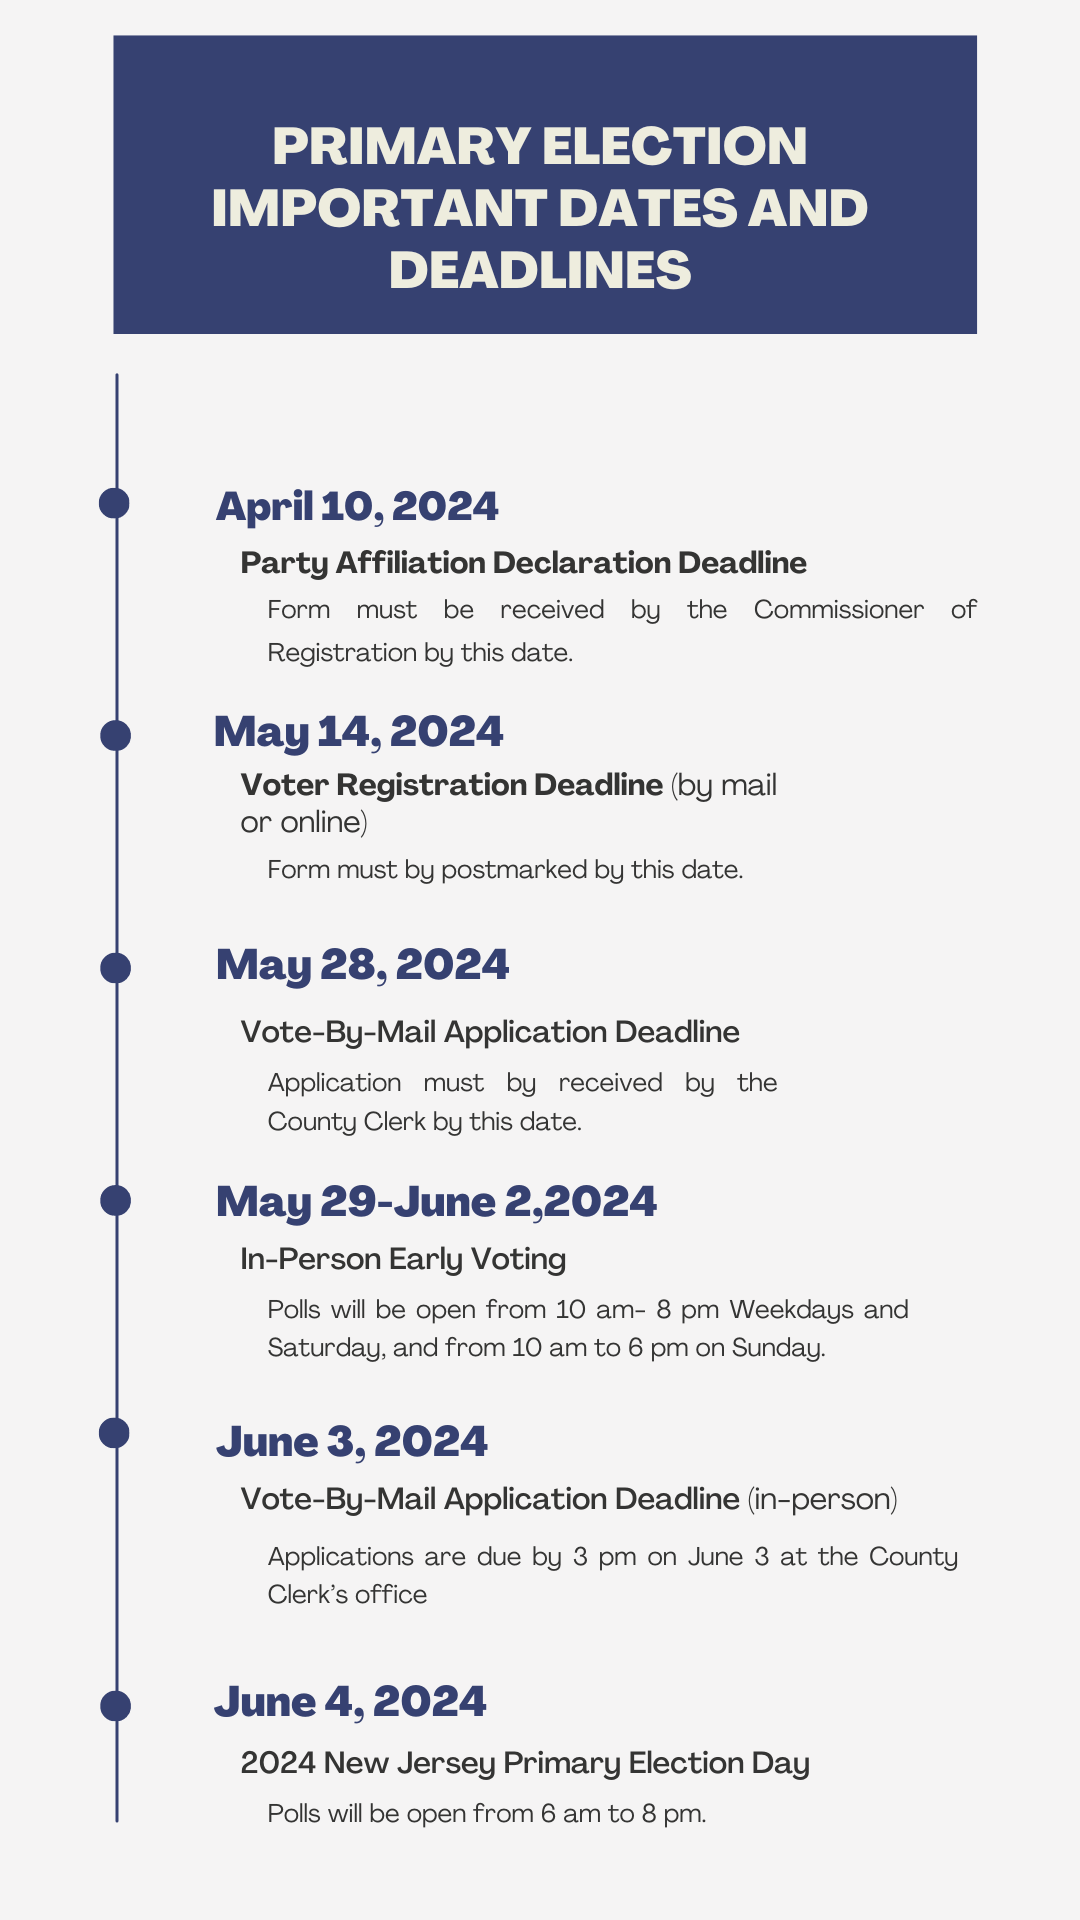 Primary Election Dates Infographic (Your Story)(1)